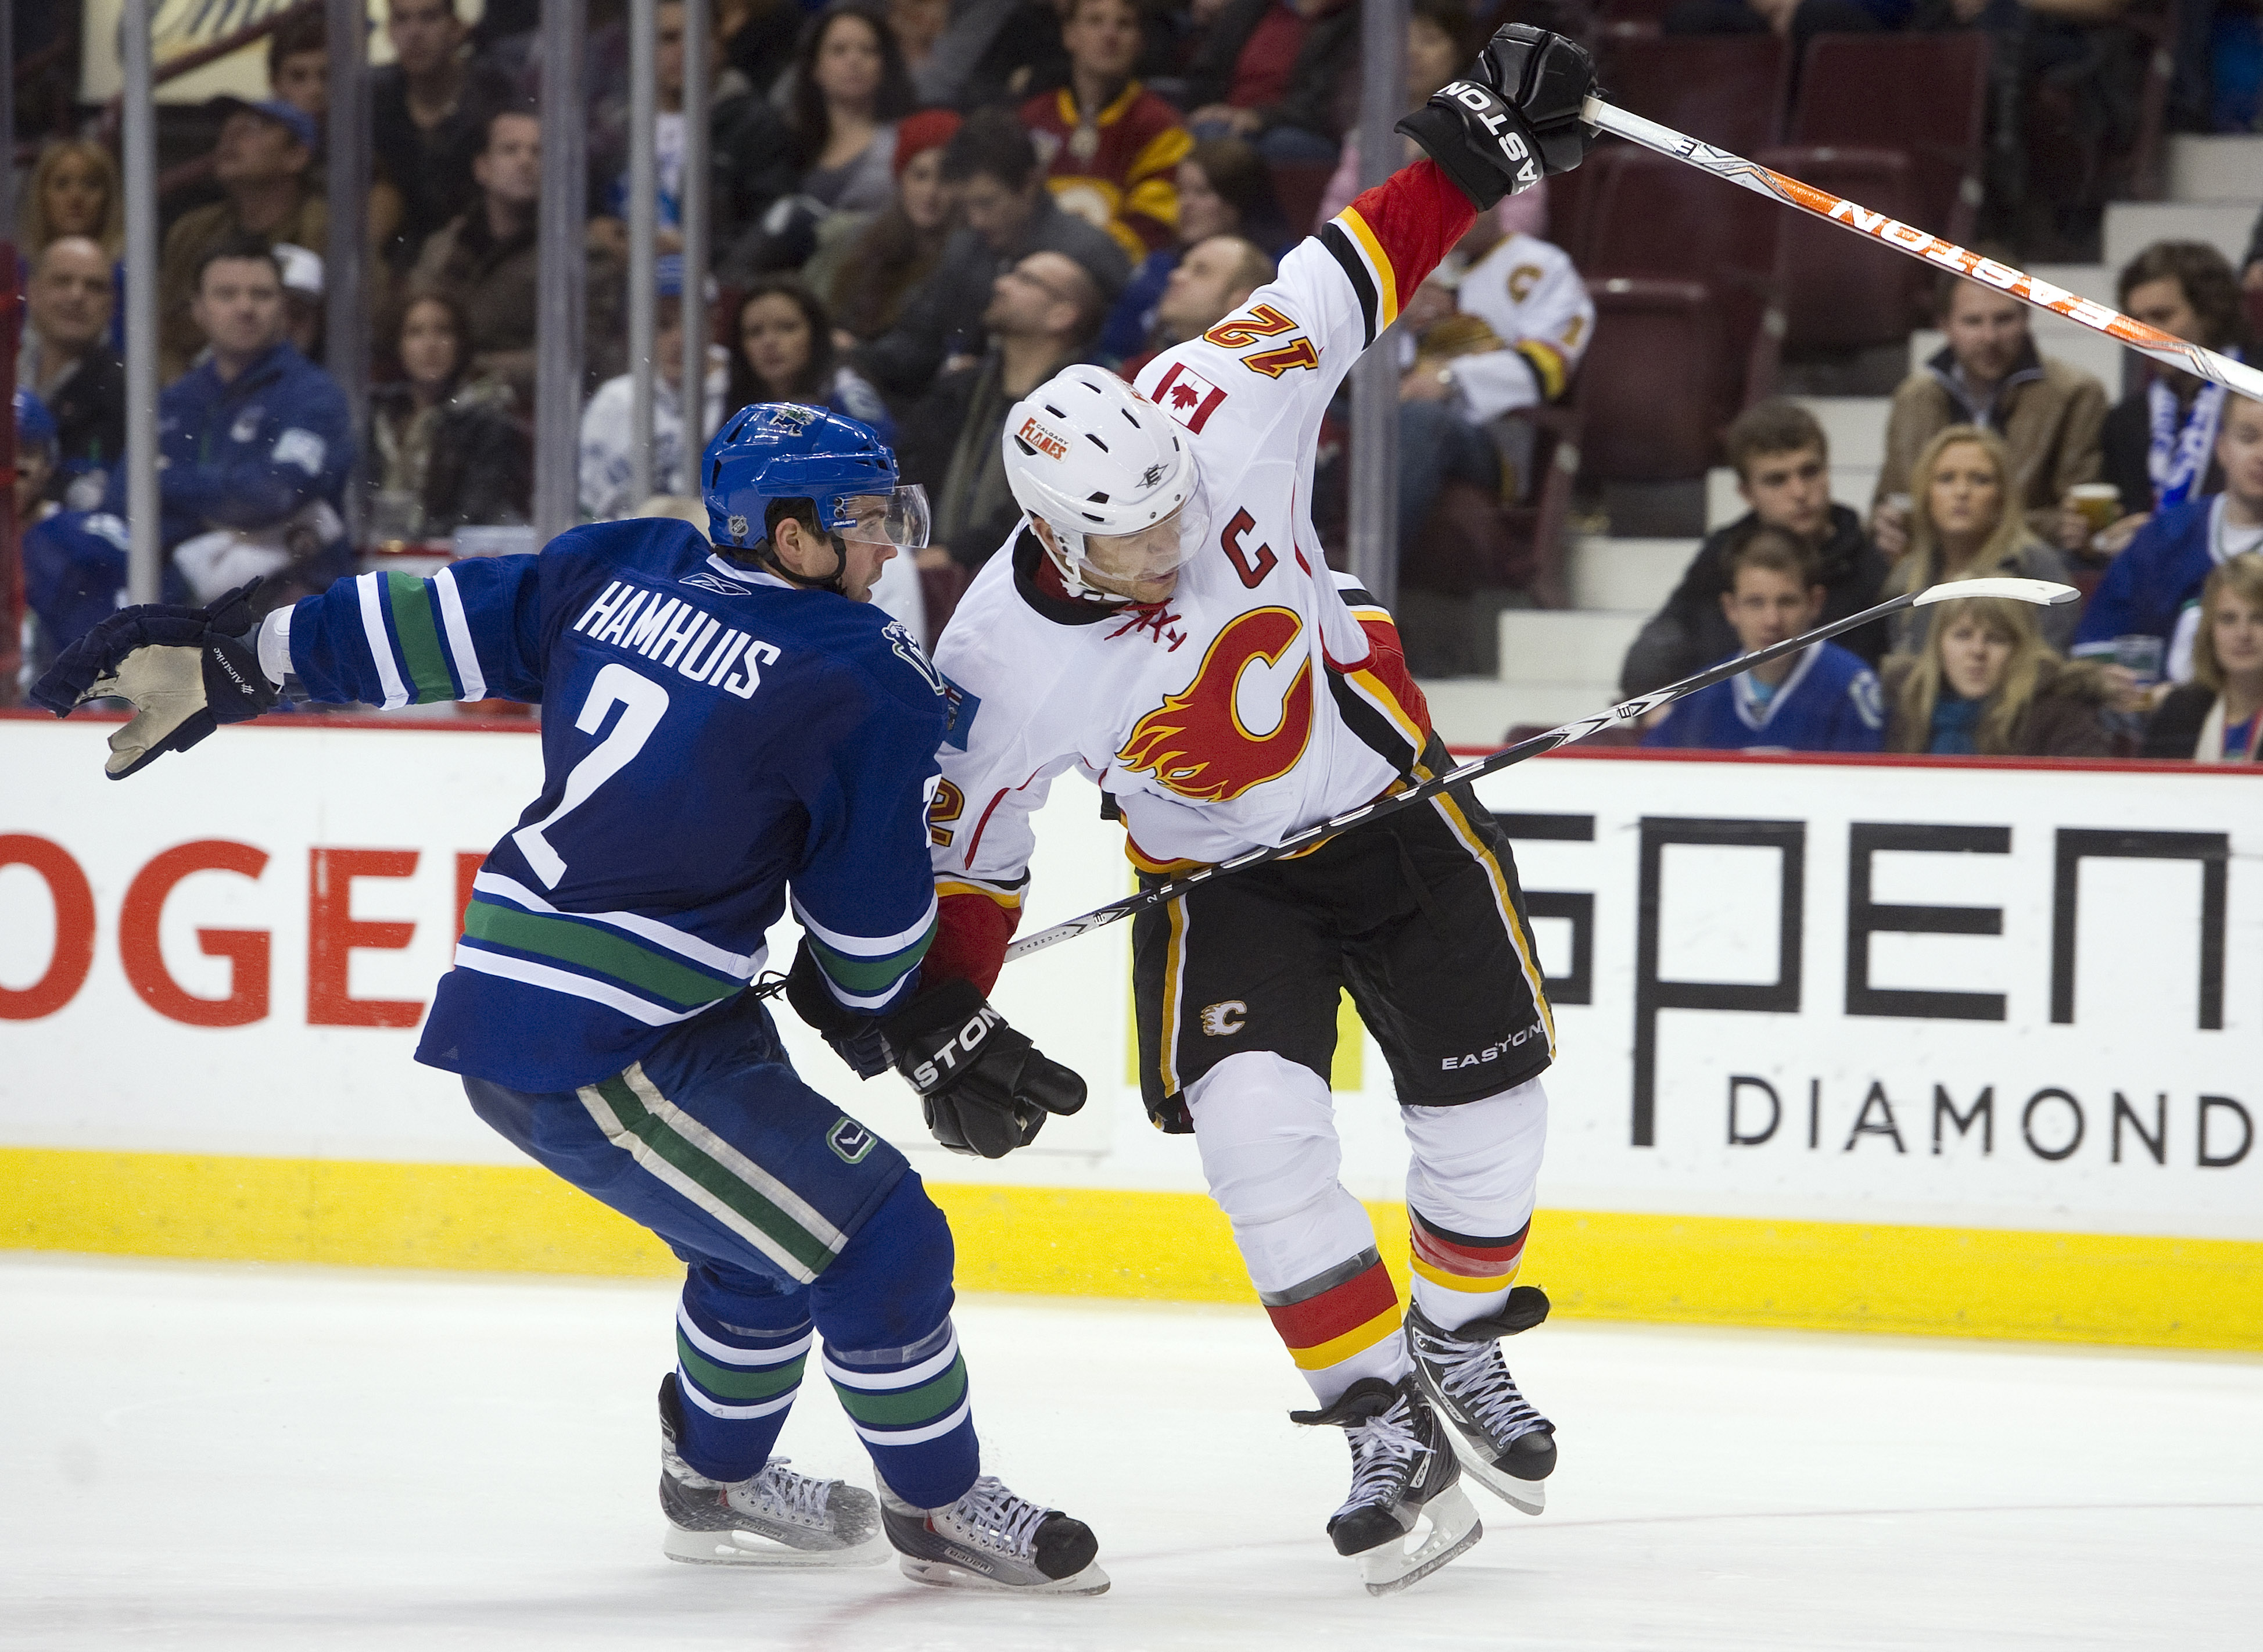 VANCOUVER, CANADA - JANUARY 22: Dan Hamhuis #2 of the Vancouver Canucks knocks Jarome Iginla #12 of the Calgary Flames off balance during the third period in NHL action on January 22, 2011 at Rogers Arena in Vancouver, British Columbia, Canada.  (Photo by